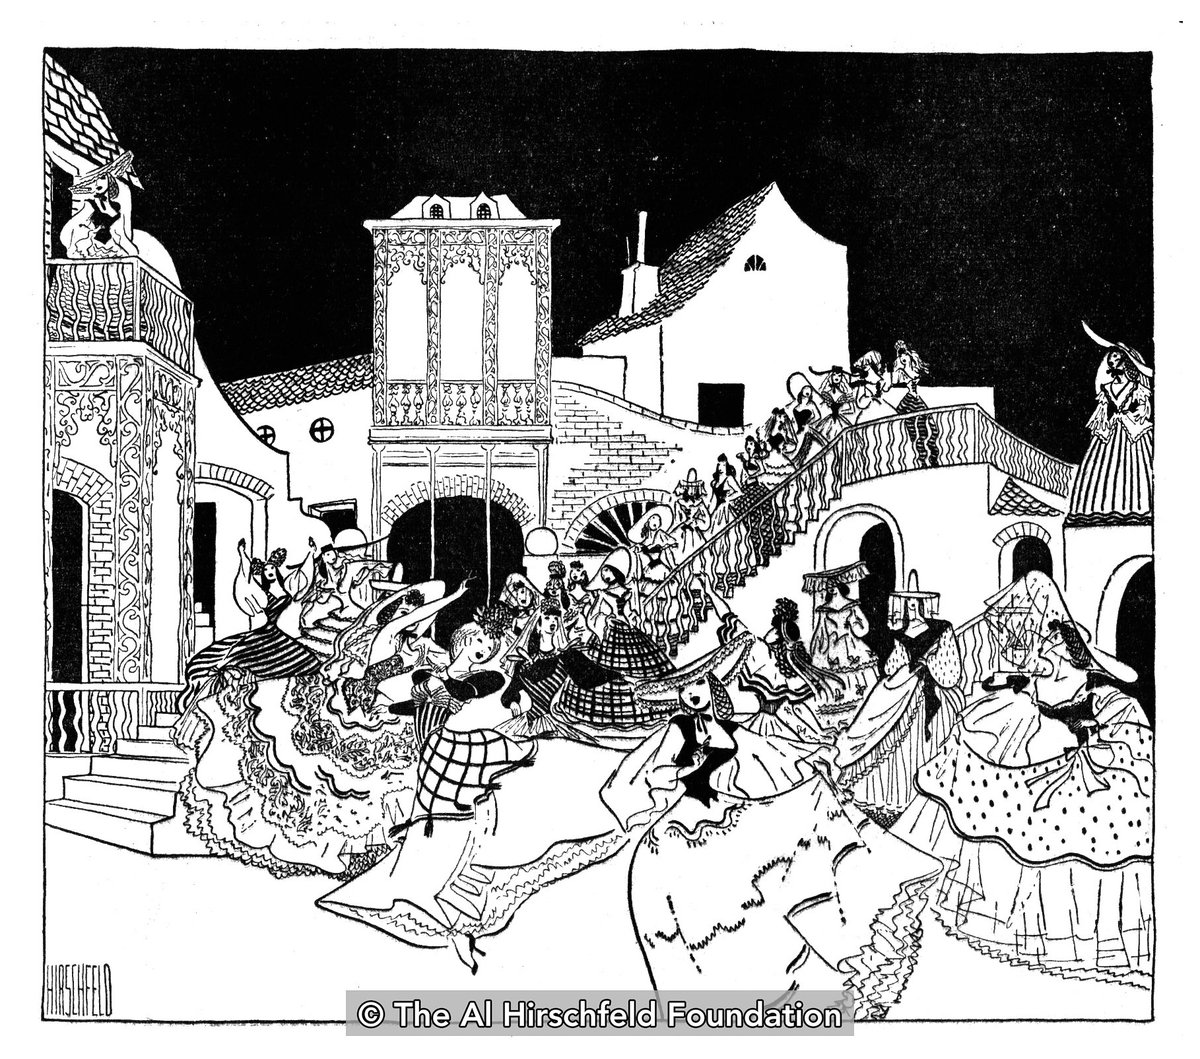 #OTD Michael Todd’s Gay New Orleans, 1940 #Hirschfeld #NewOrleans #Drawing #architecture #Art #Play